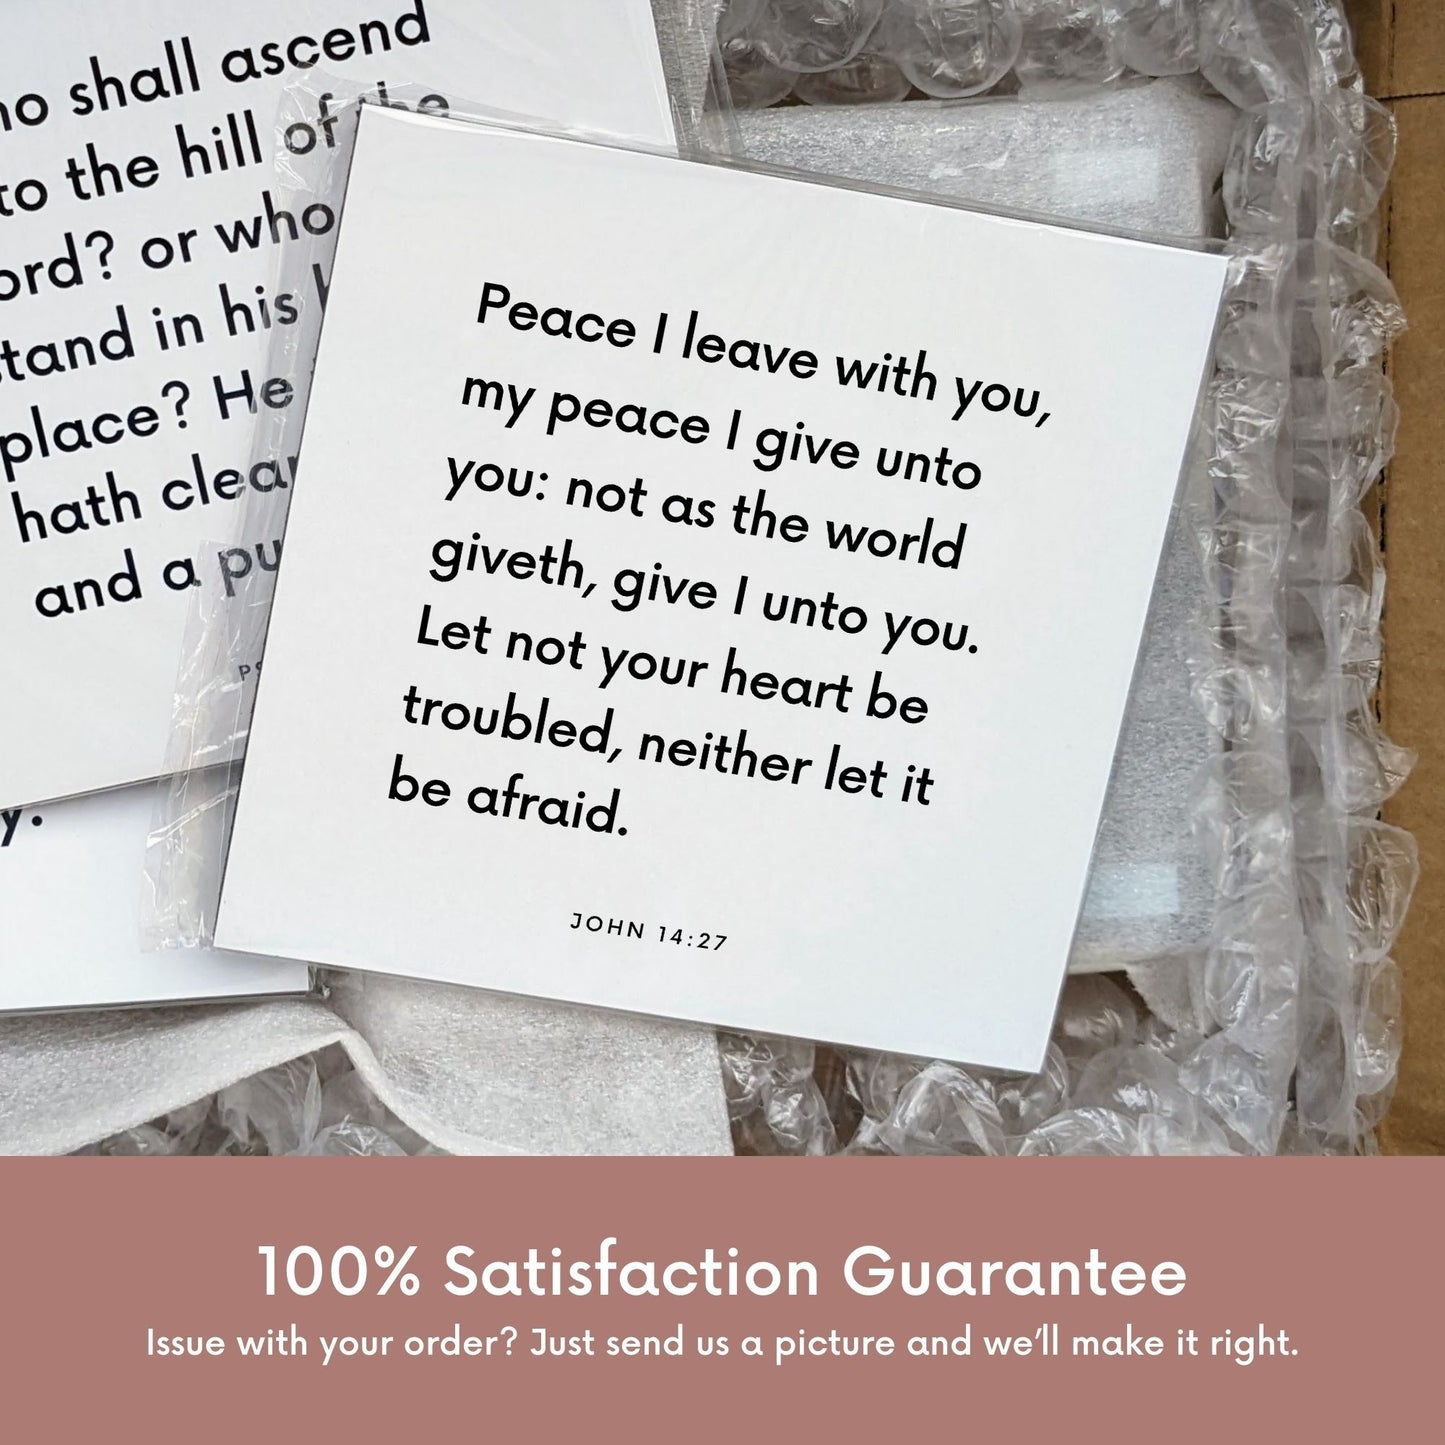 Shipping materials for scripture tile of John 14:27 - "Peace I leave with you, my peace I give unto you"